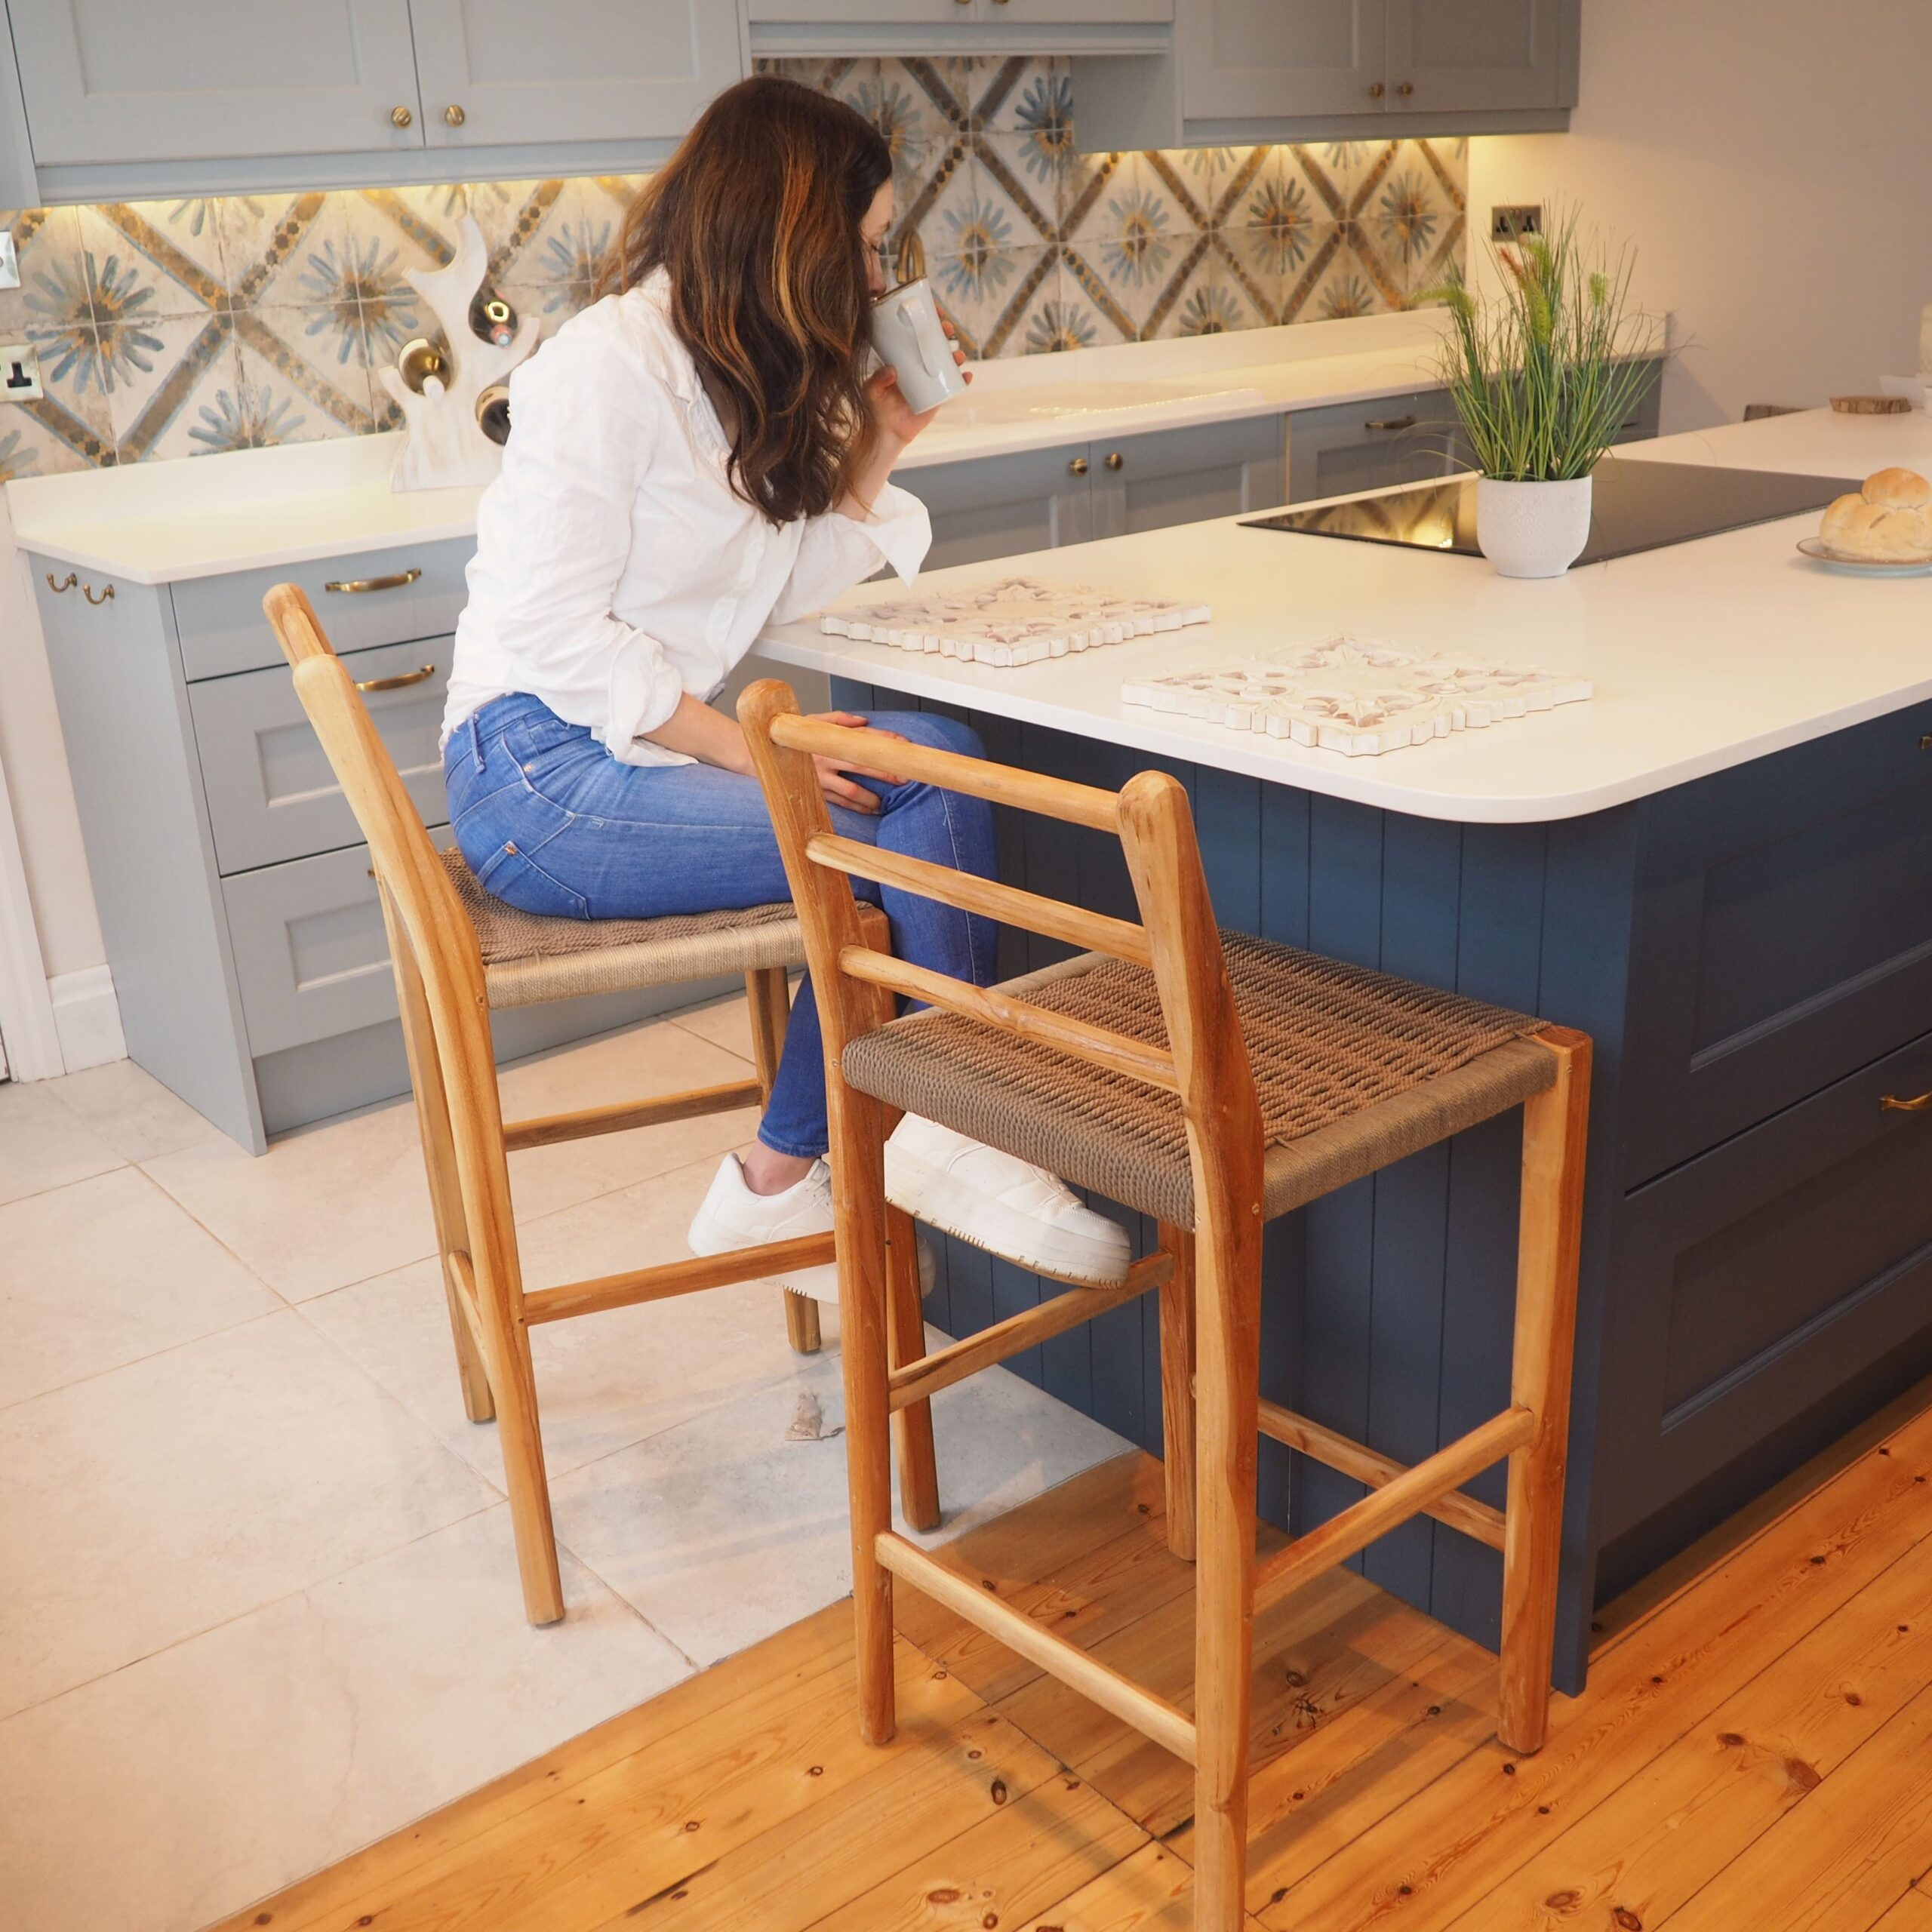 Woman sat on natural kitchen stool in blue kitchen space